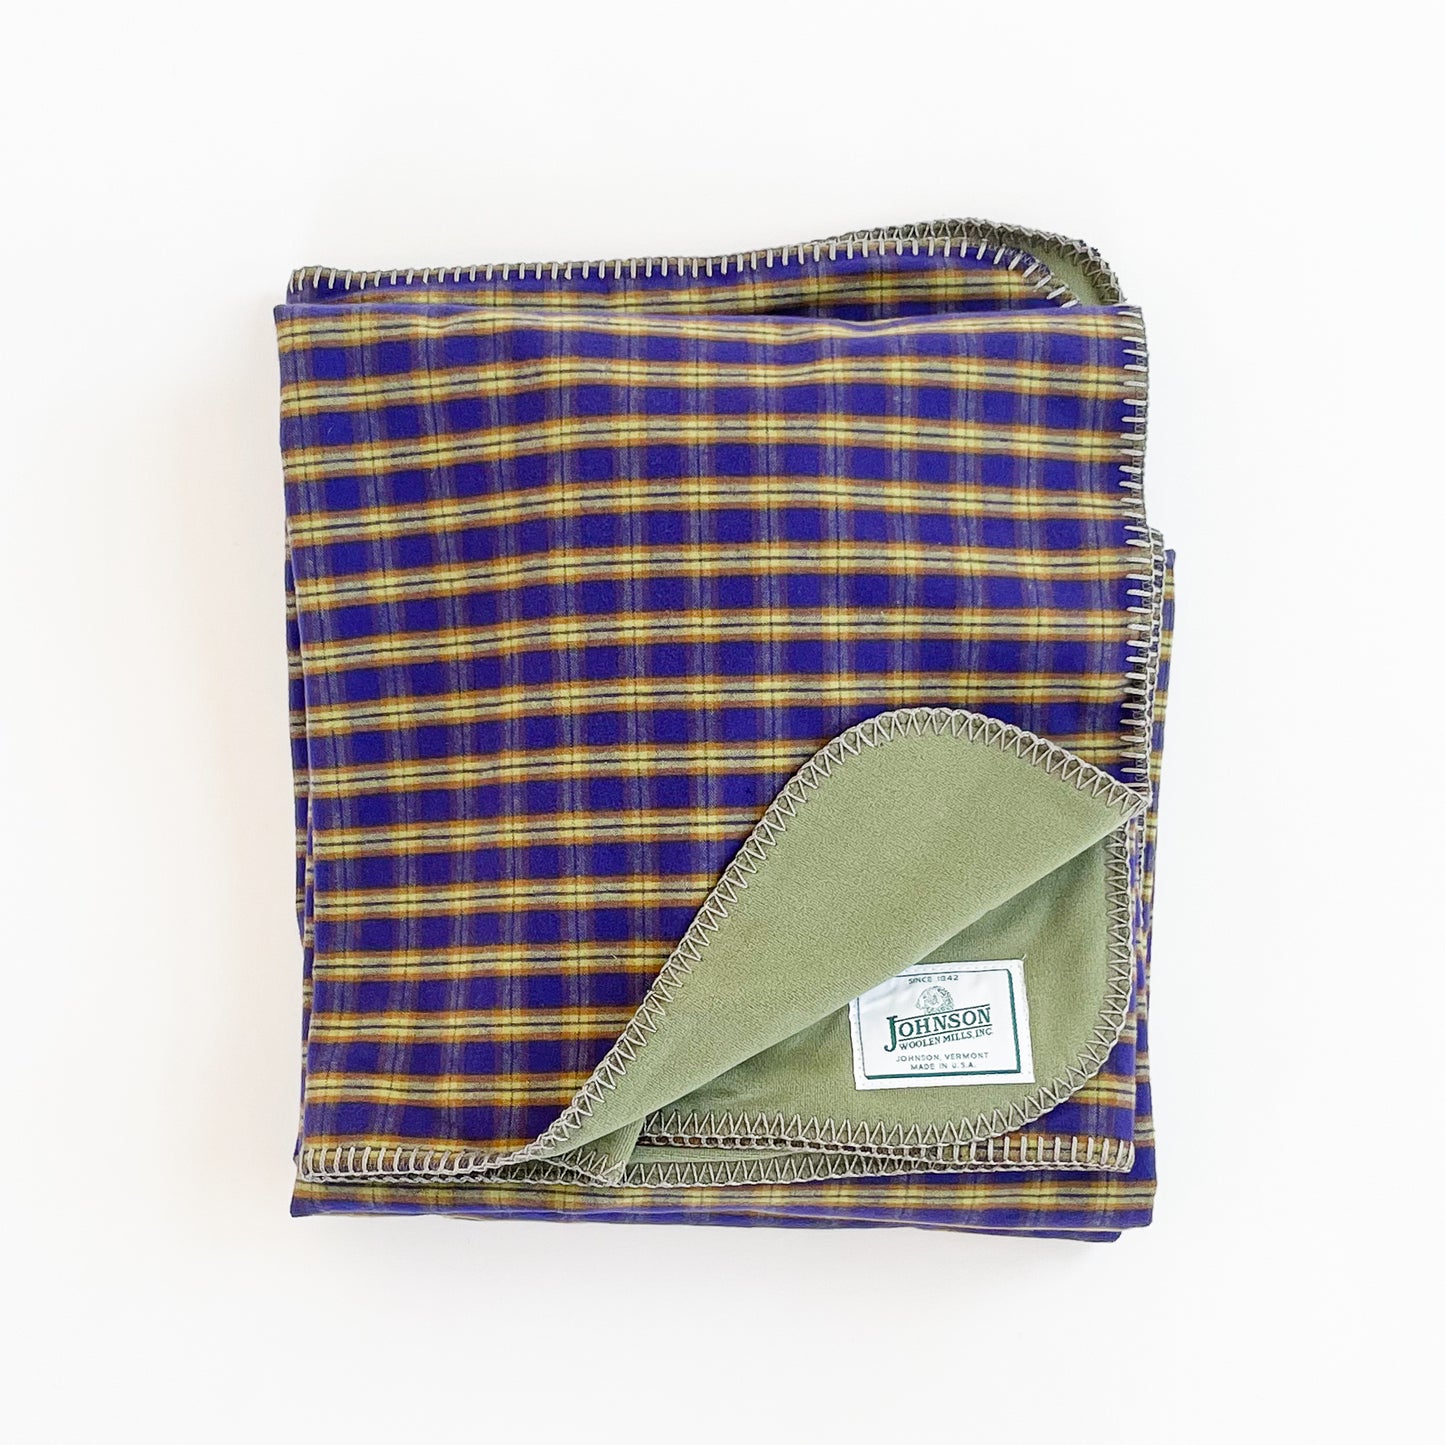 Green Mountain Flannel Throw Bali purple & green stripes with lime green fleece lining open corner view